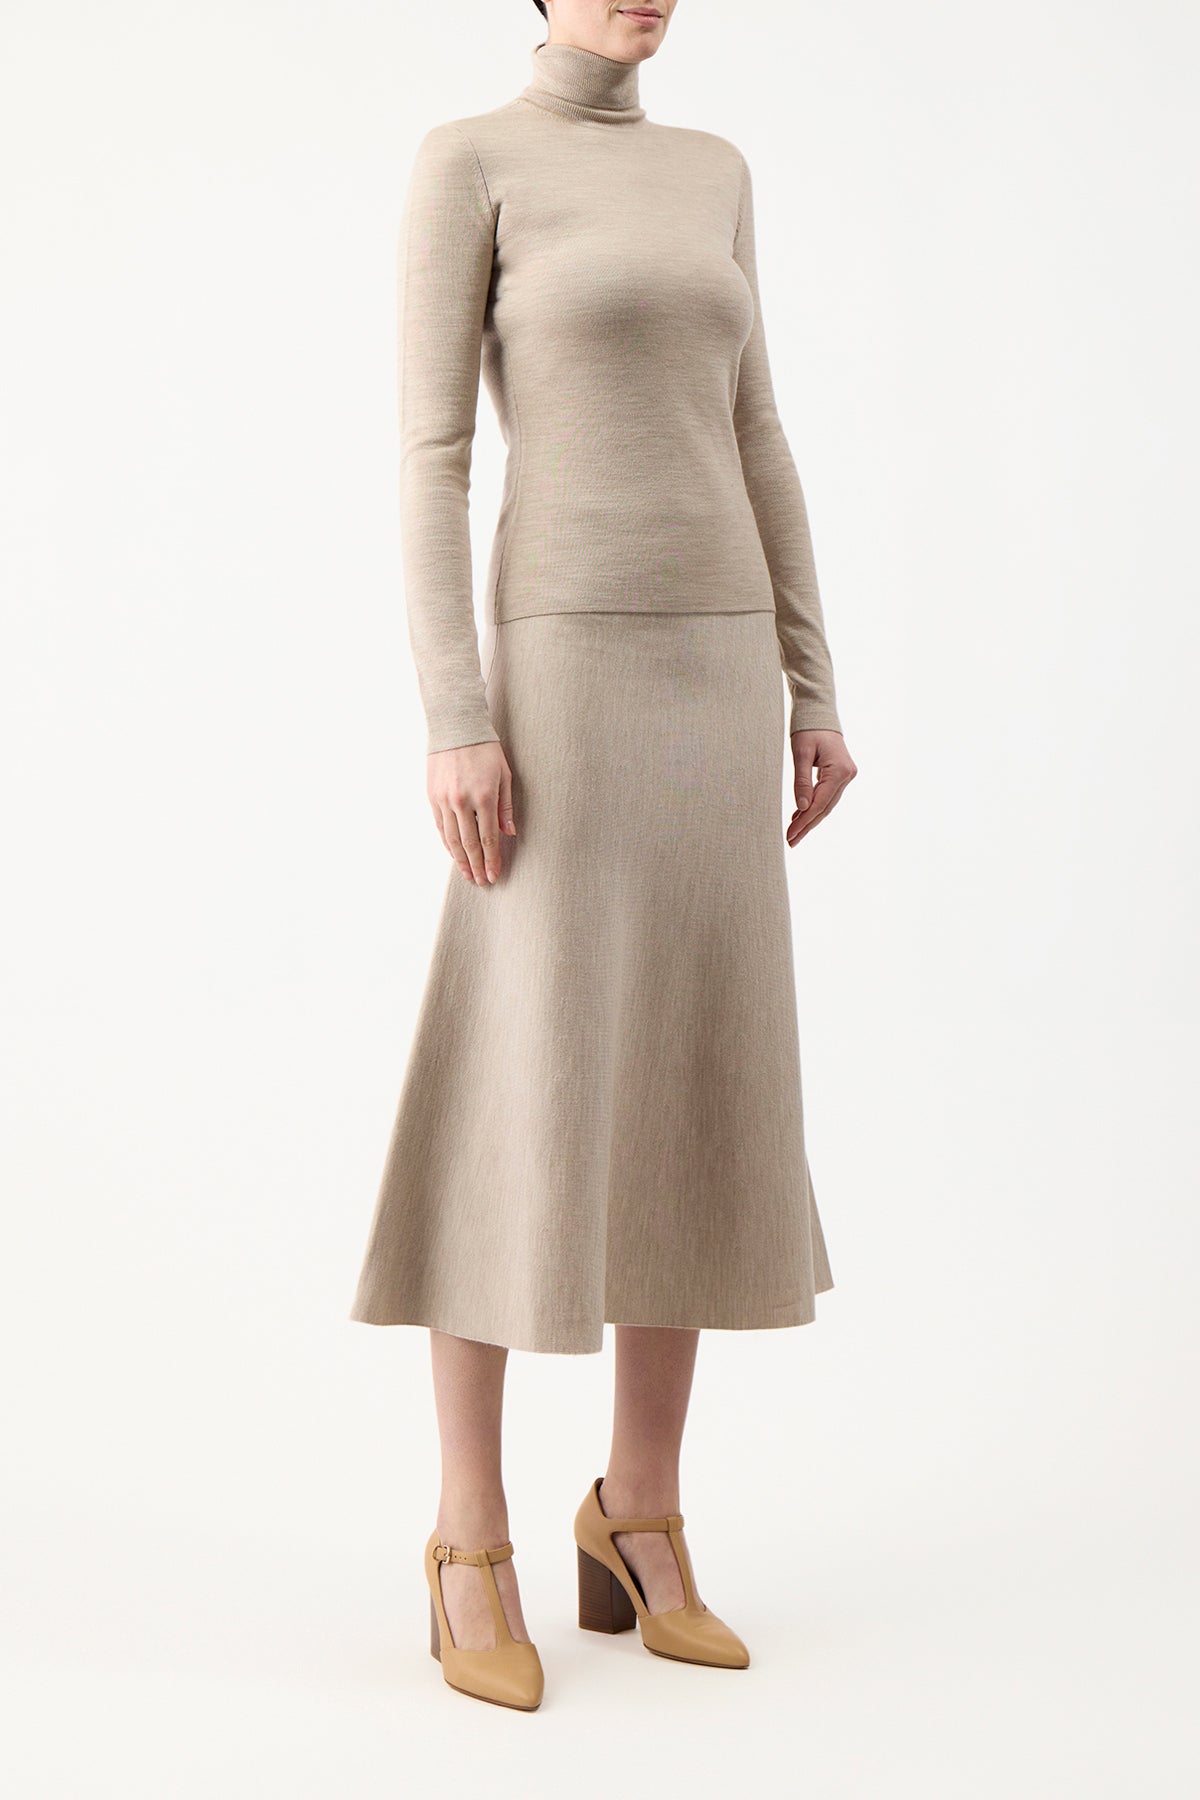 May Knit Turtleneck in Oatmeal Cashmere Wool